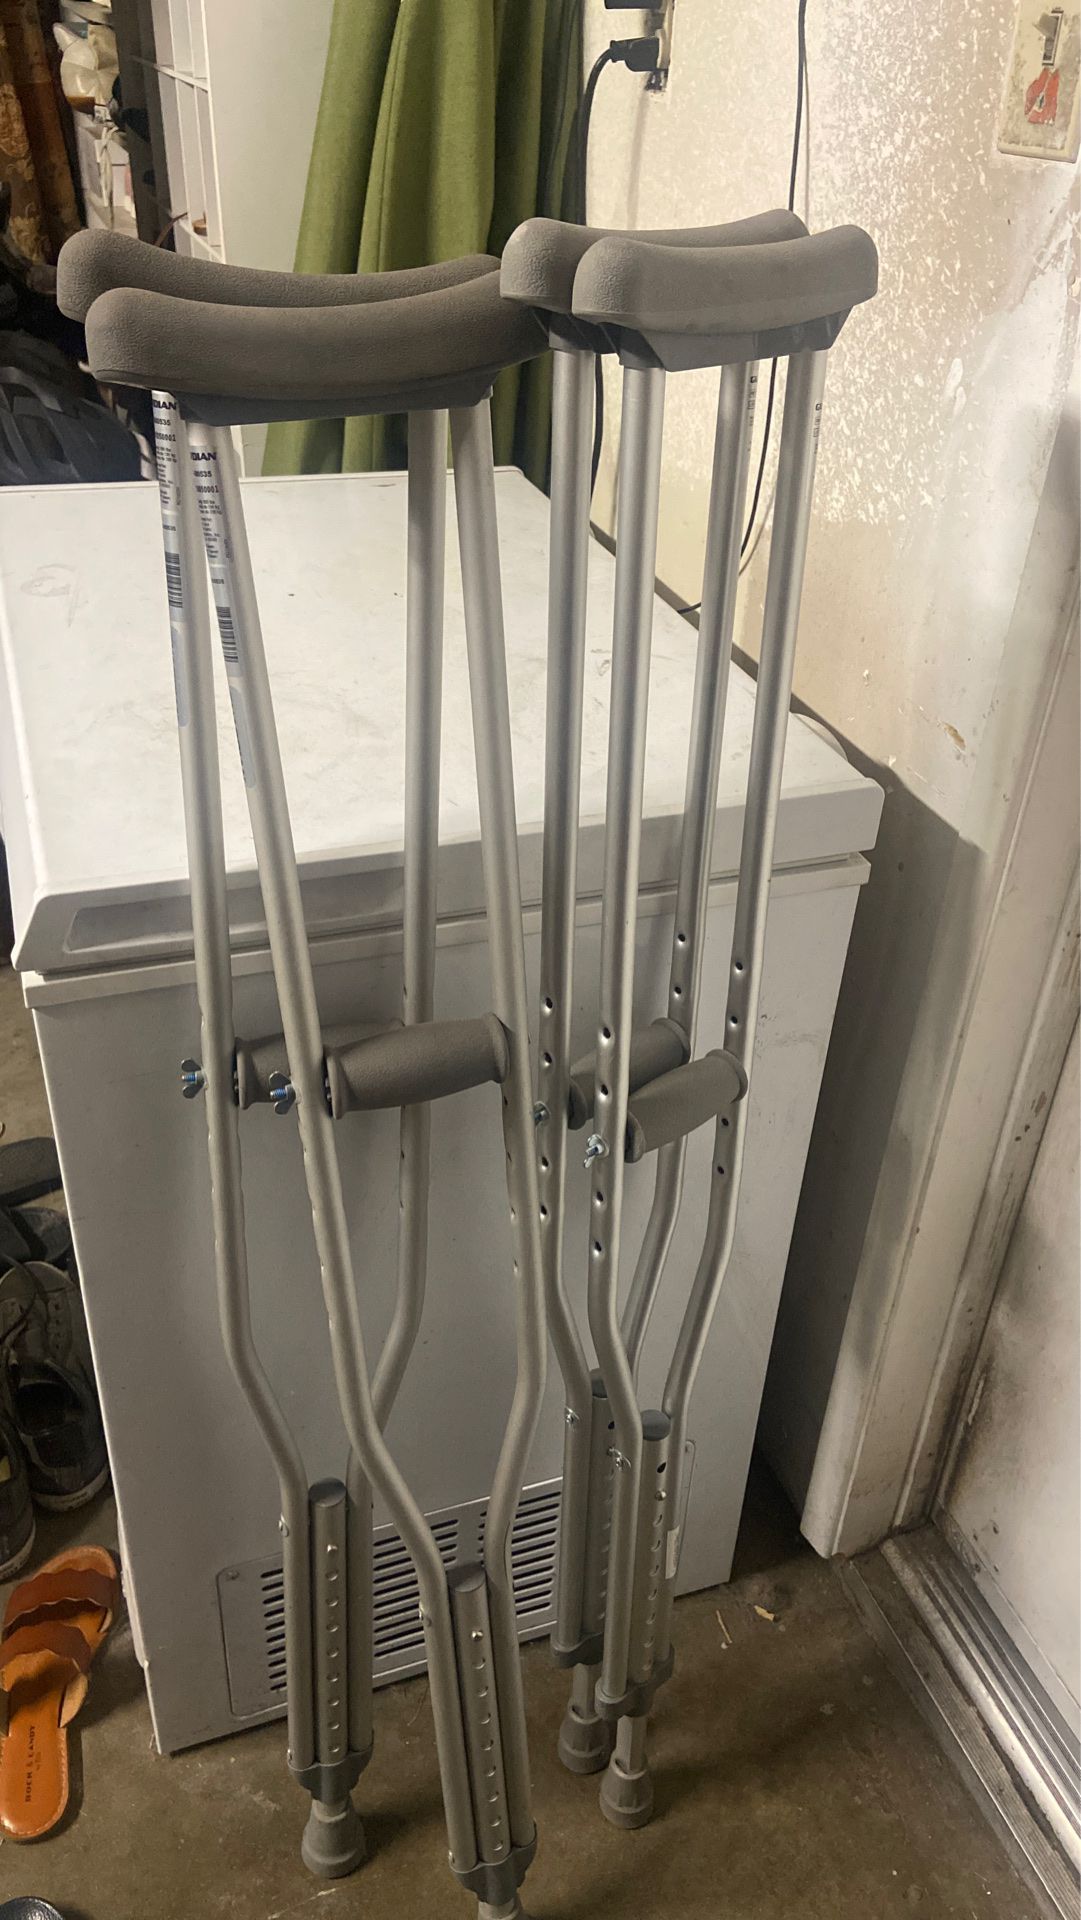 2 sets of crutches